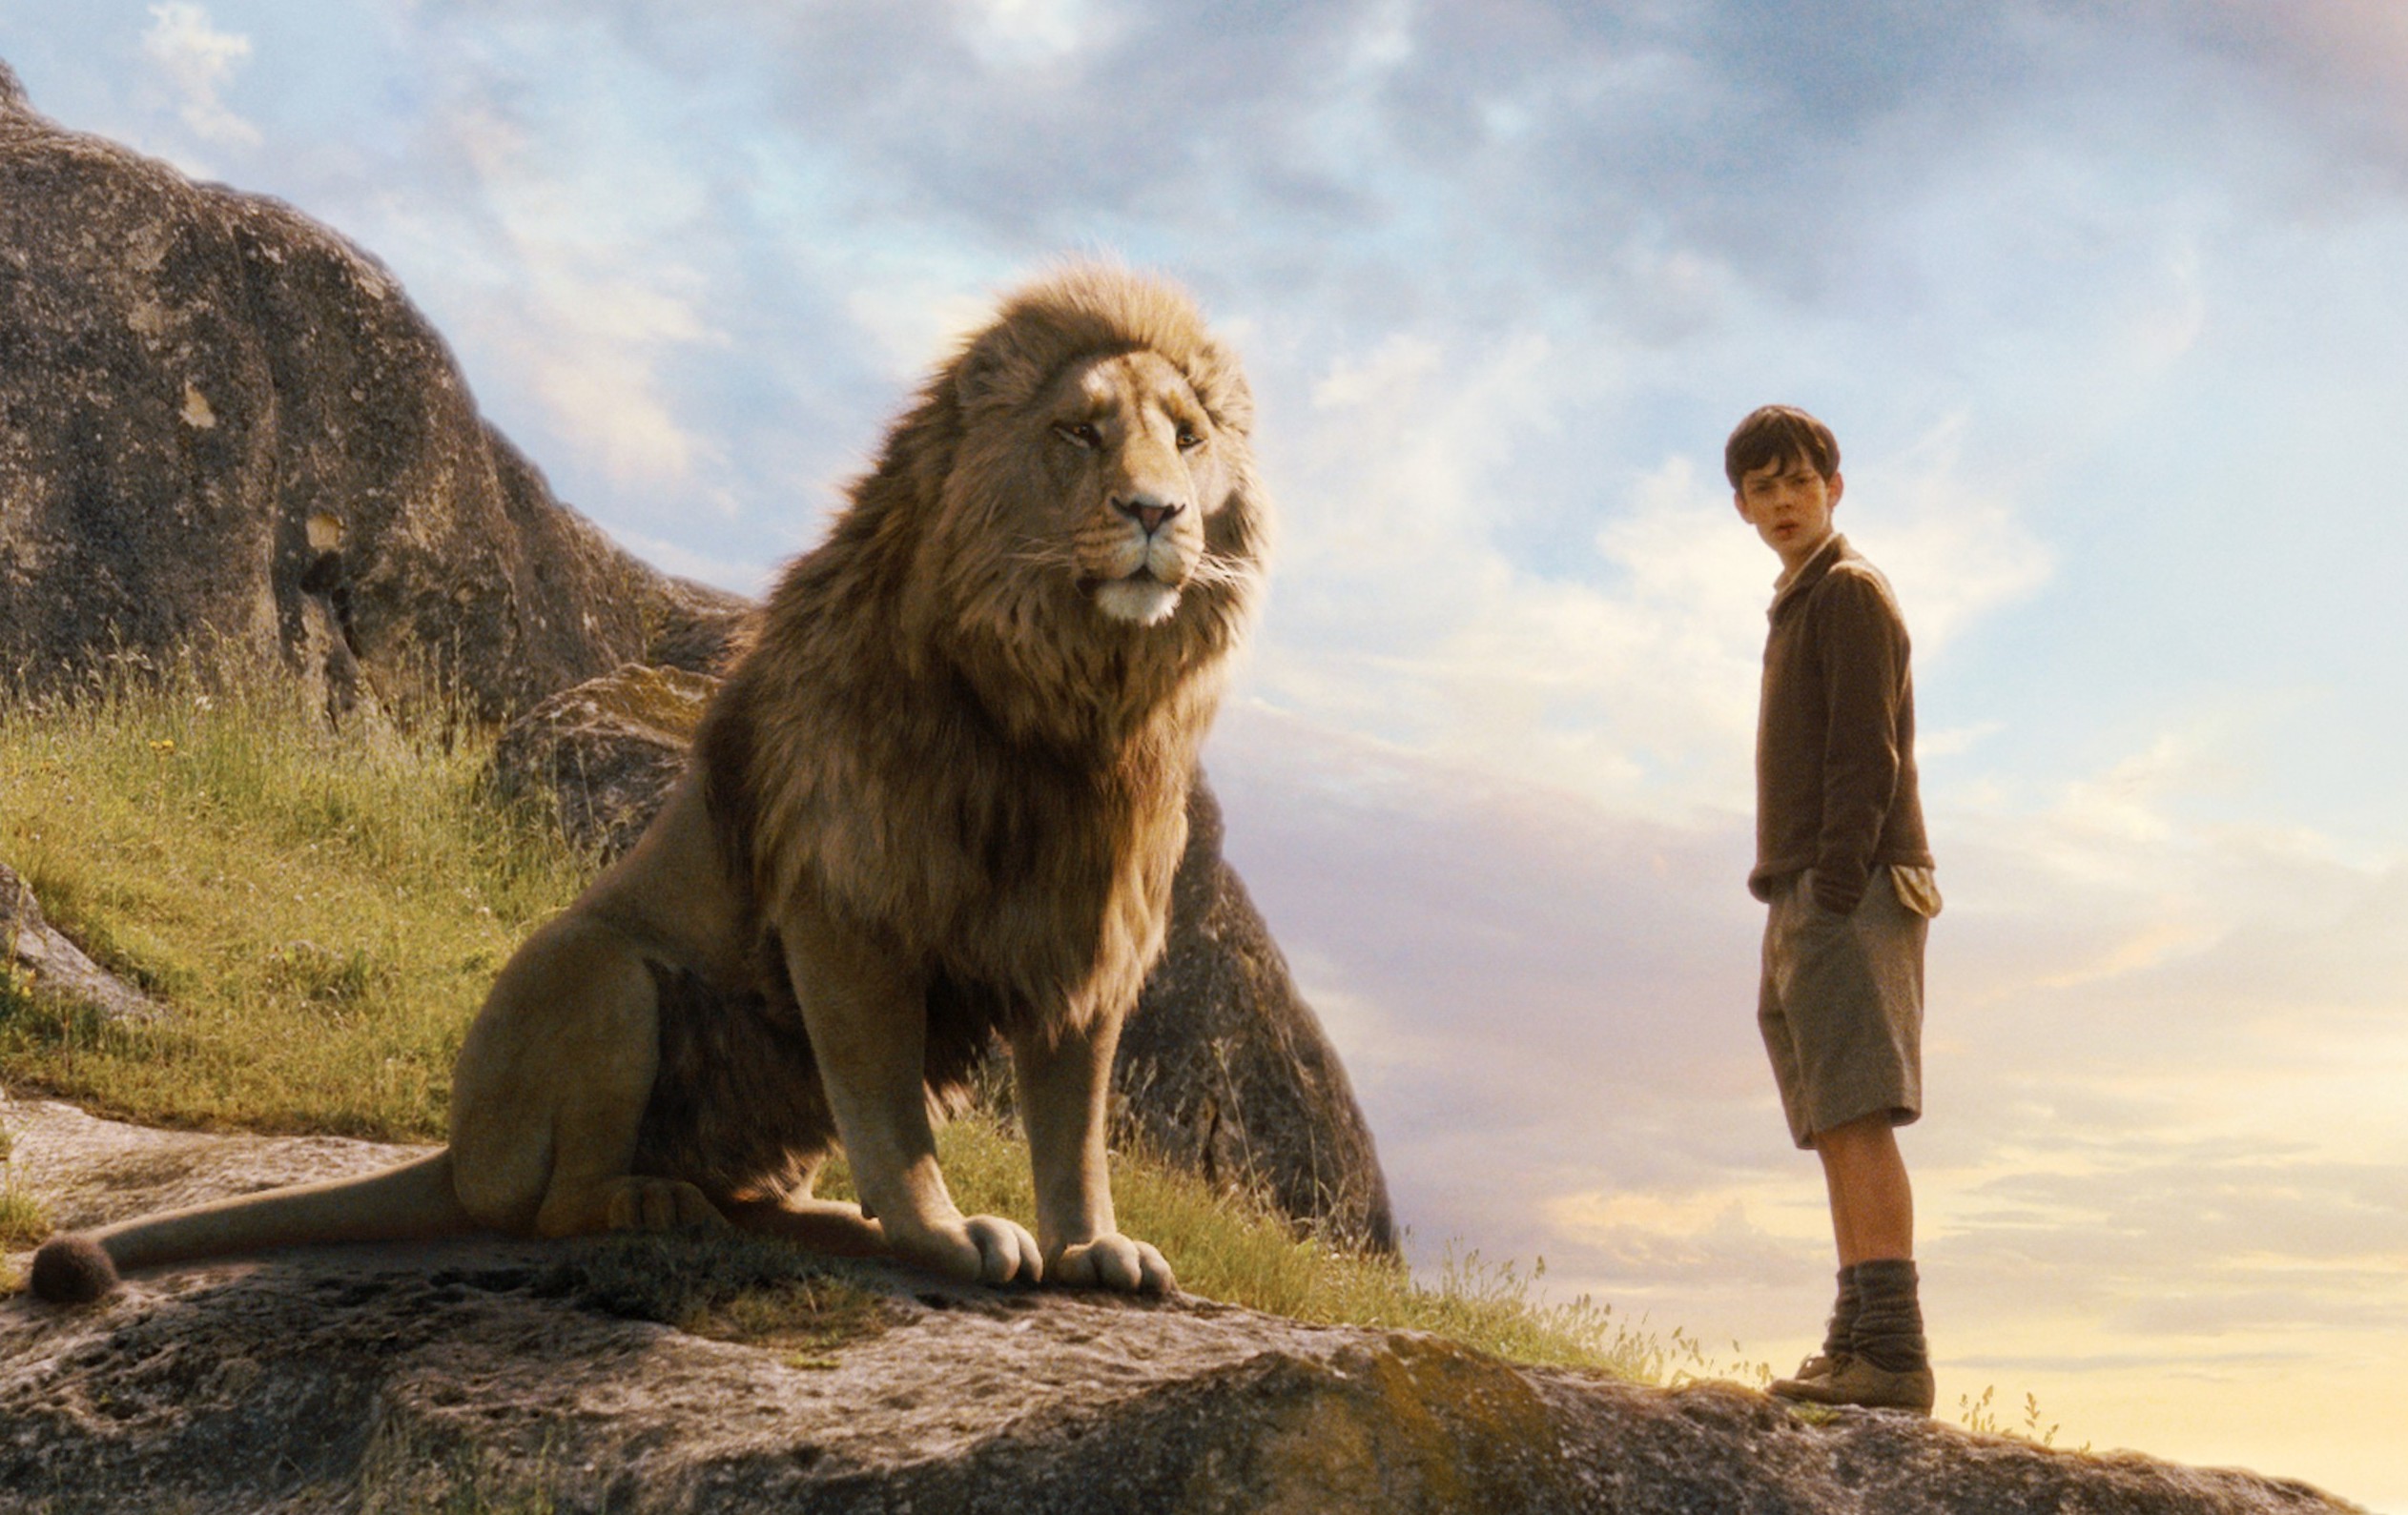 The Chronicles of Narnia: The Lion, the Witch, and the Wardrobe / The Pain  of Death's Defeat